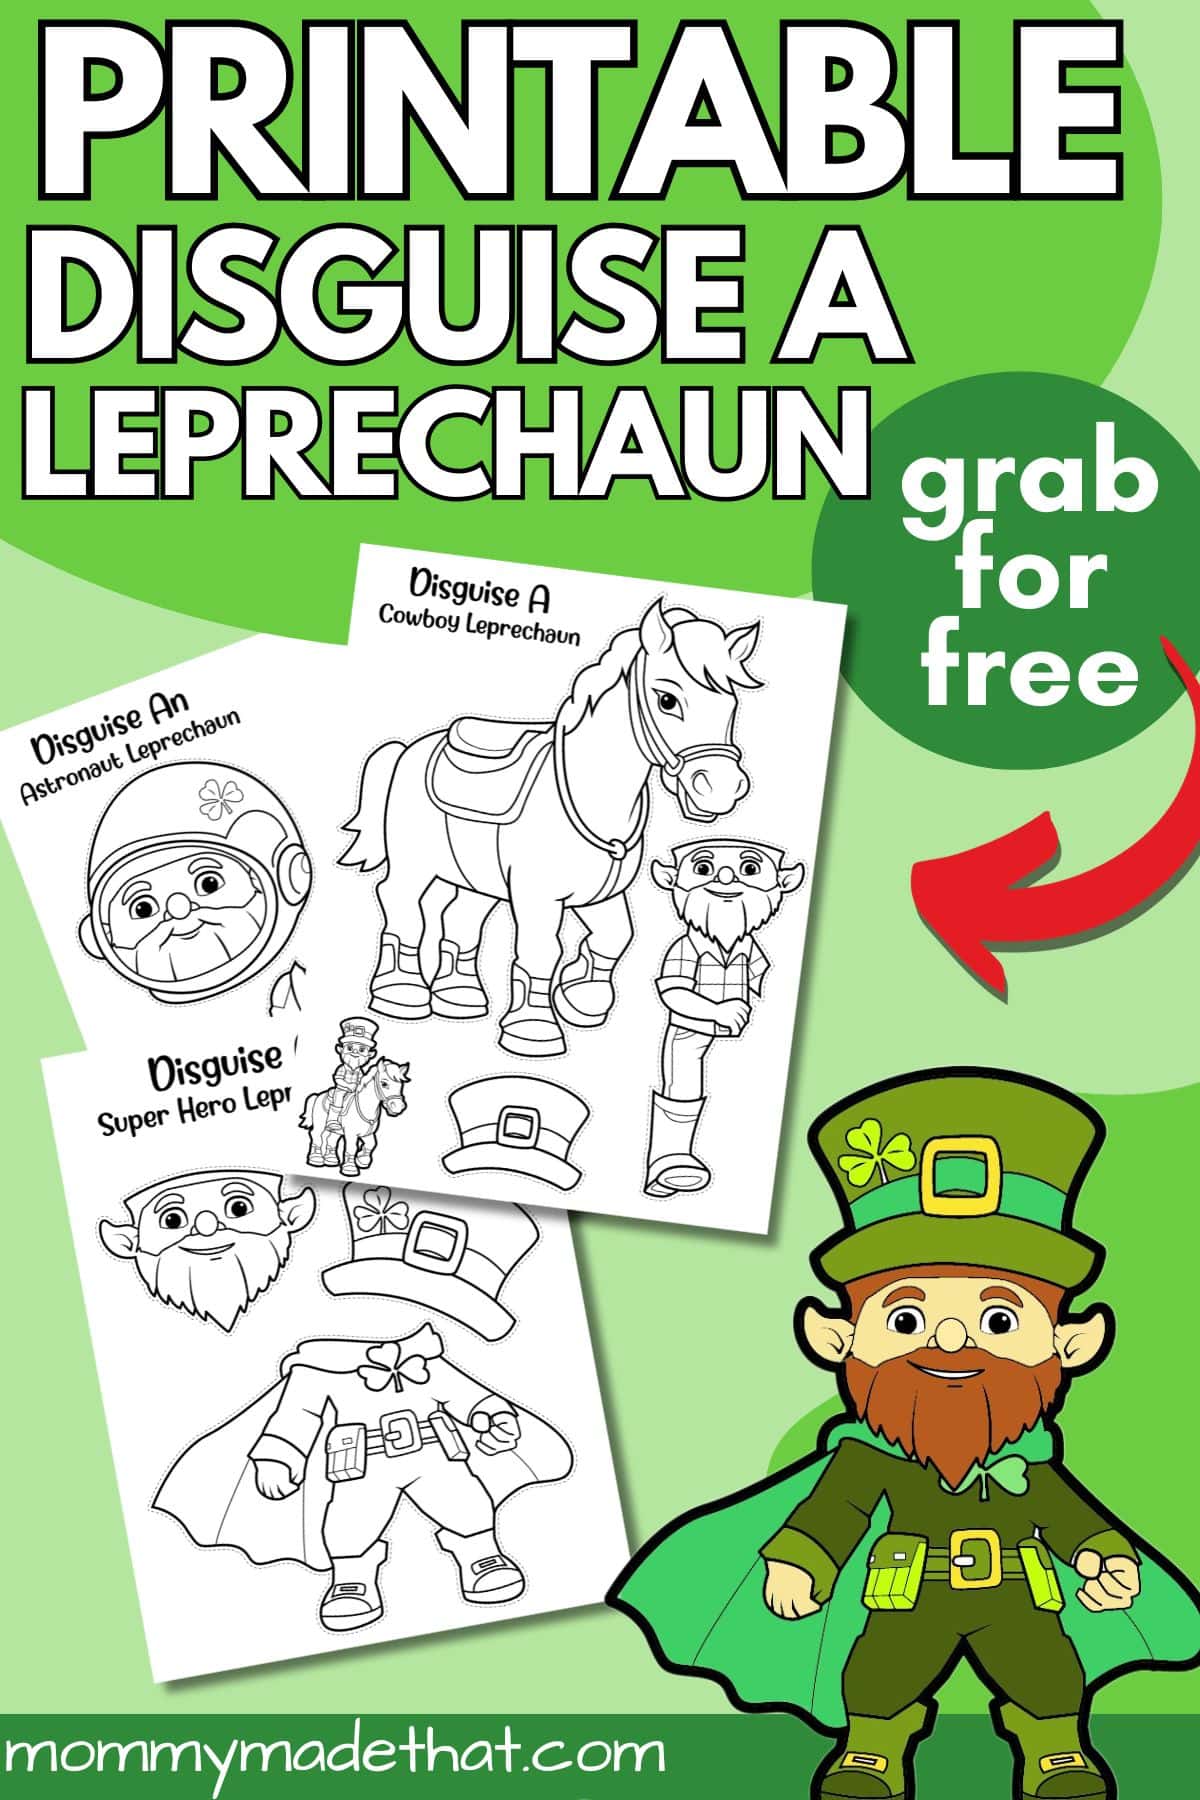 Disguise a leprechaun Craft project. Free printables.